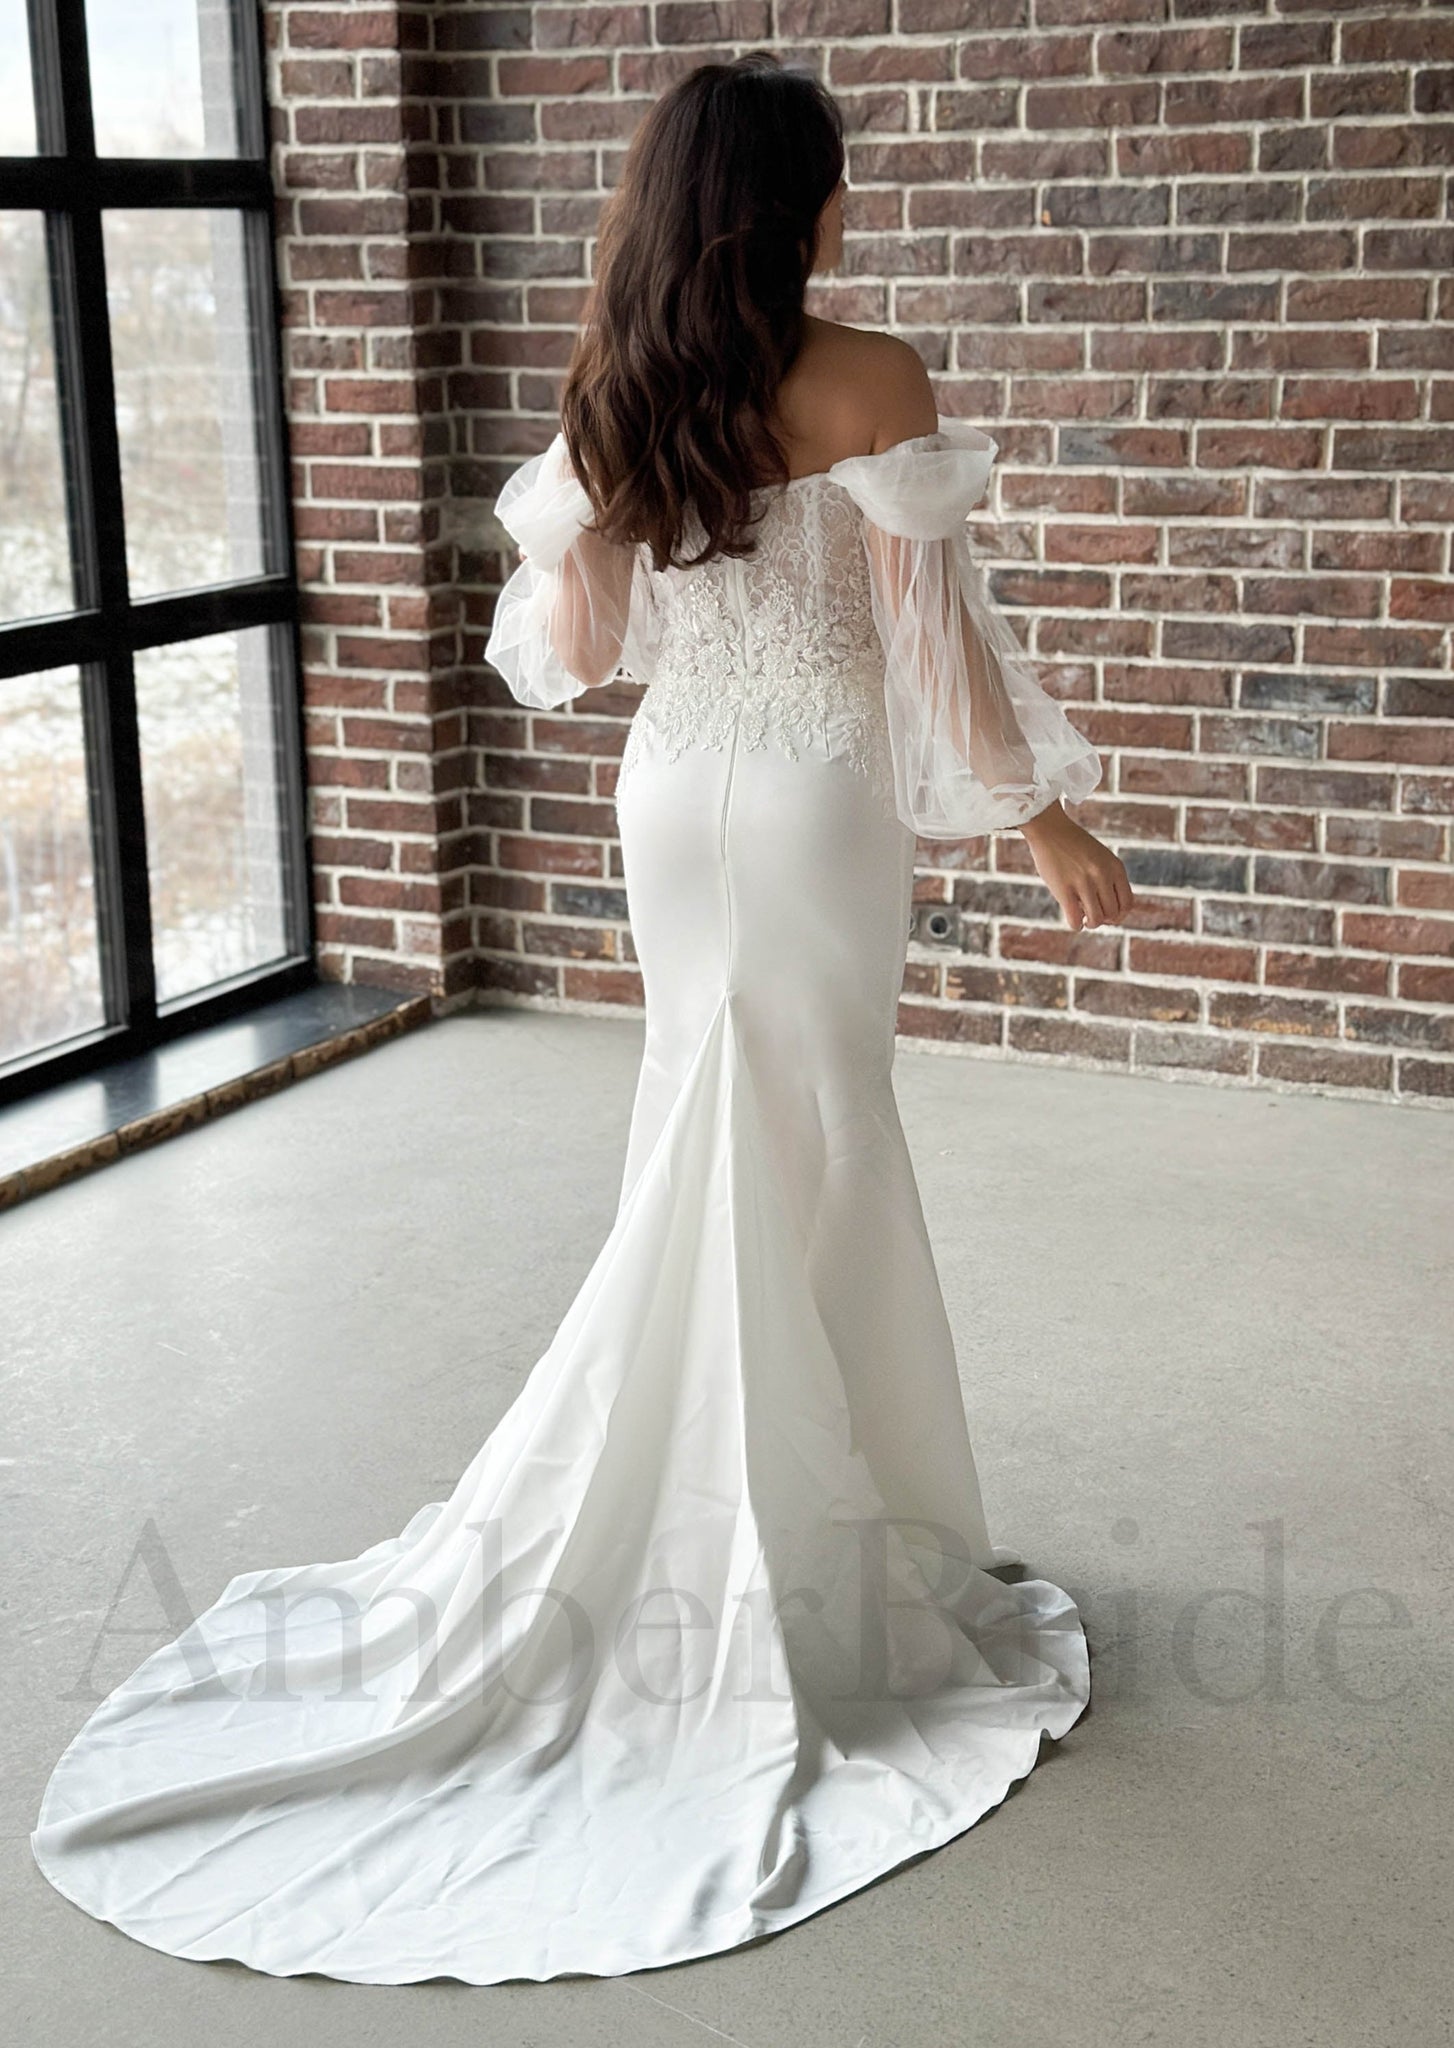 Rustic Mermaid Wedding Dress with Deep V-Neckline and Off-Shoulder Puffy Sleeves